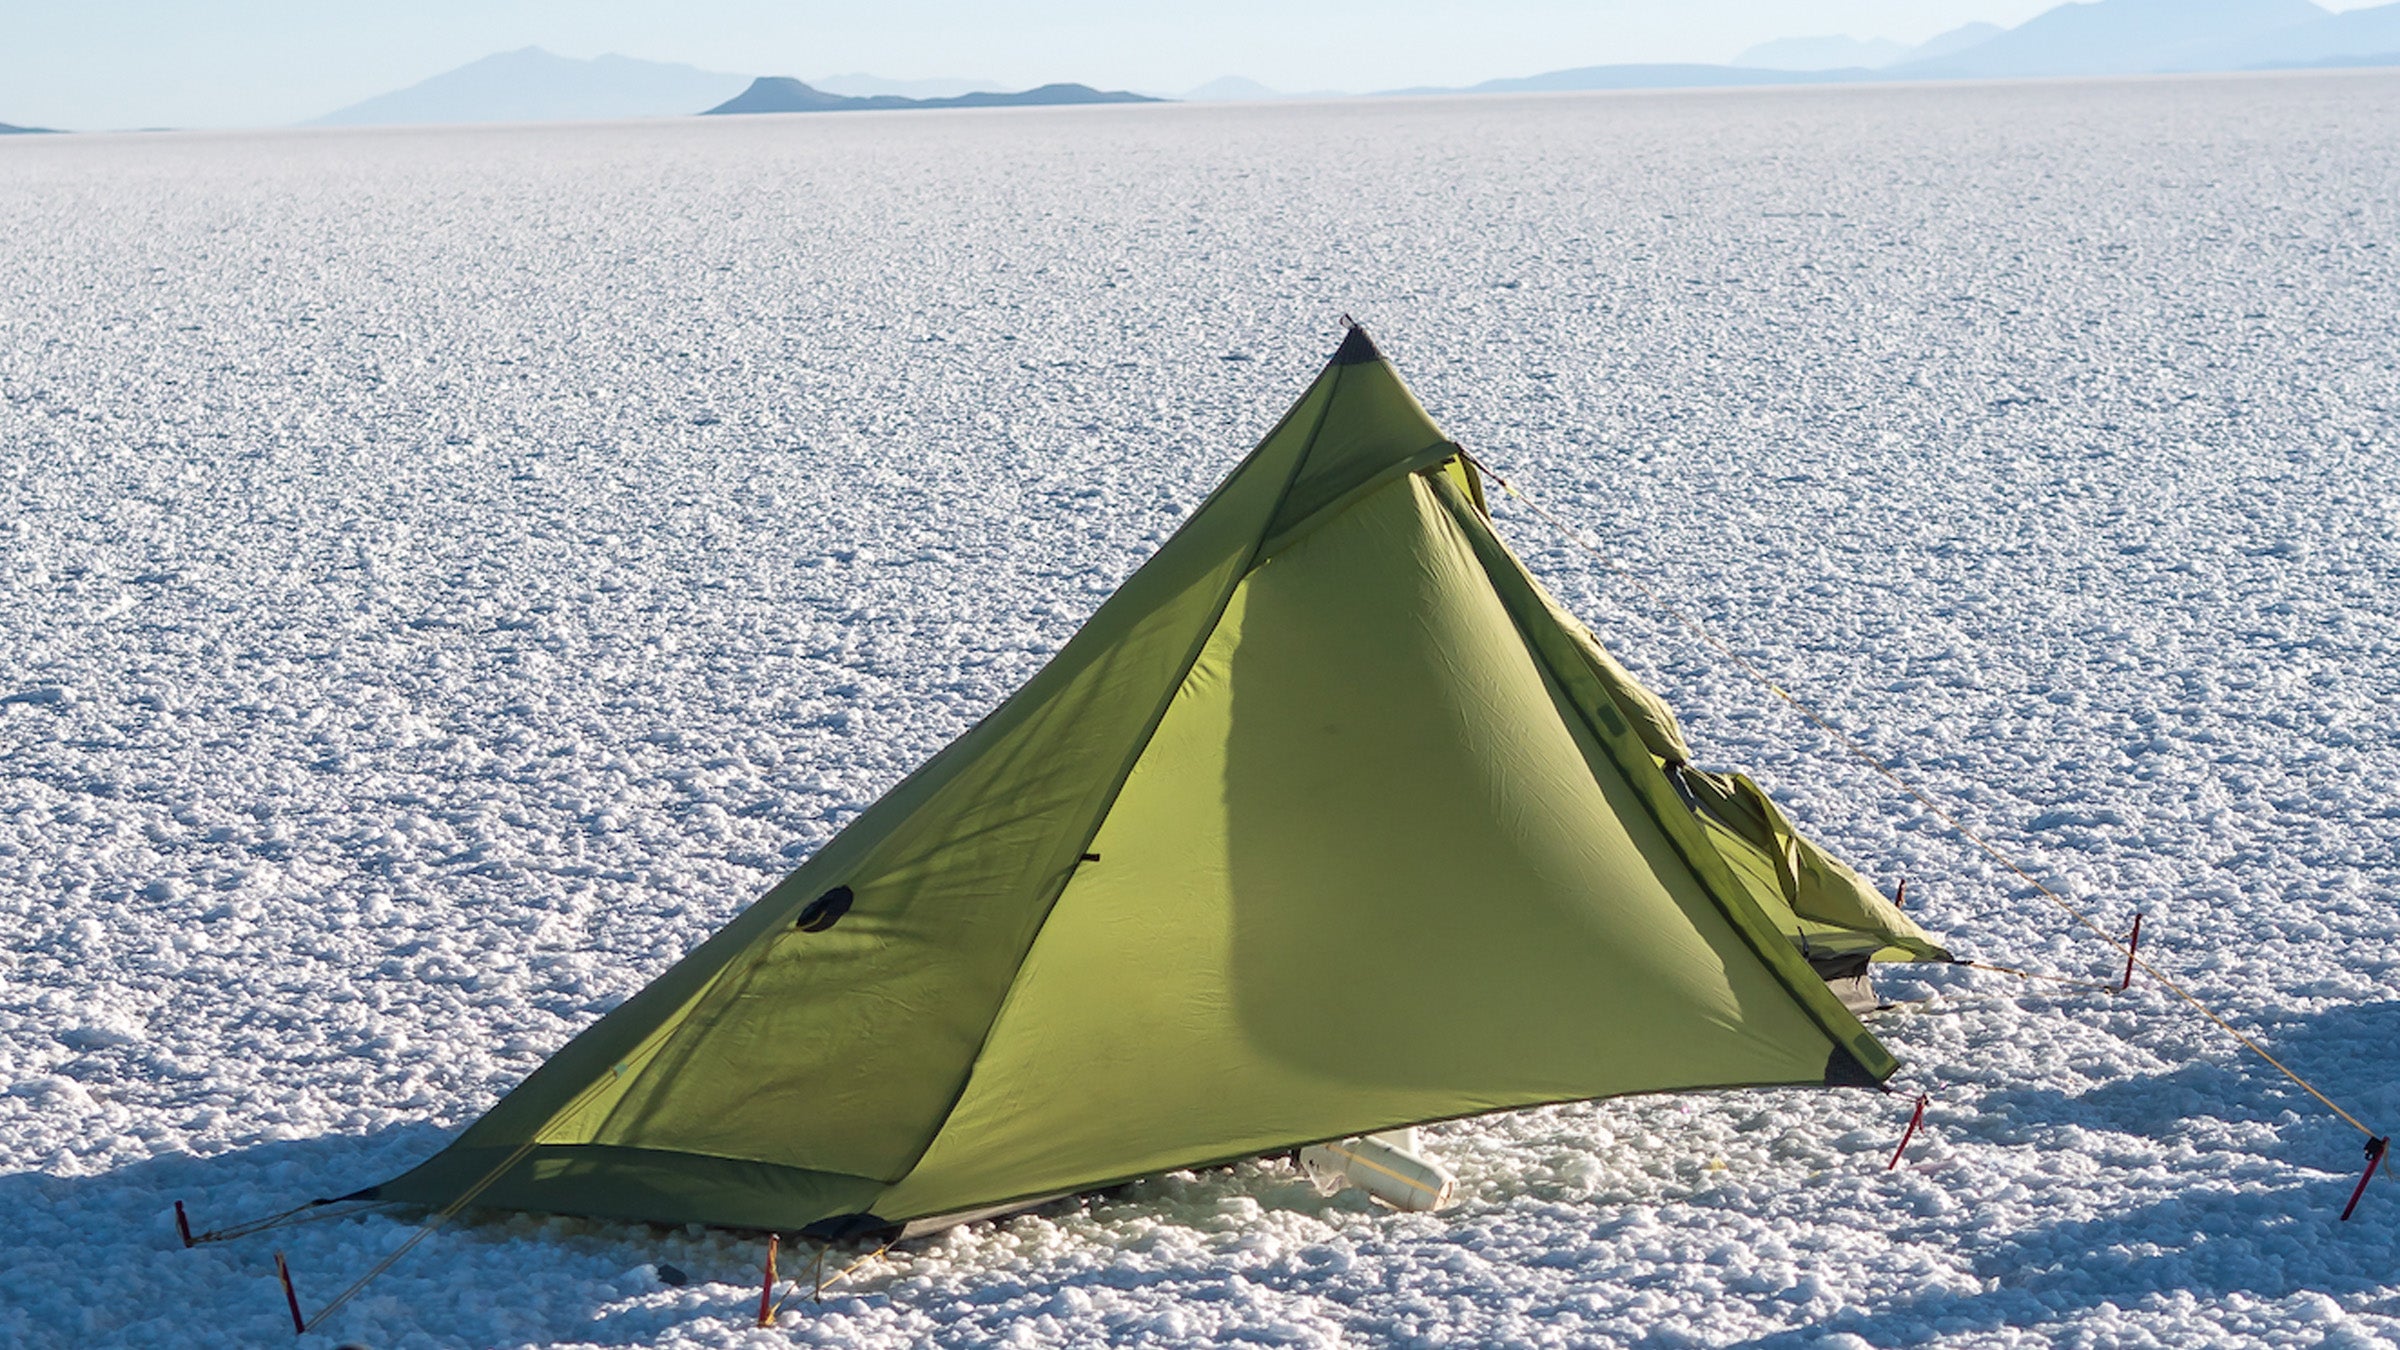 Camping Accessories for Your Next Outdoor Adventure – That's Tianjin